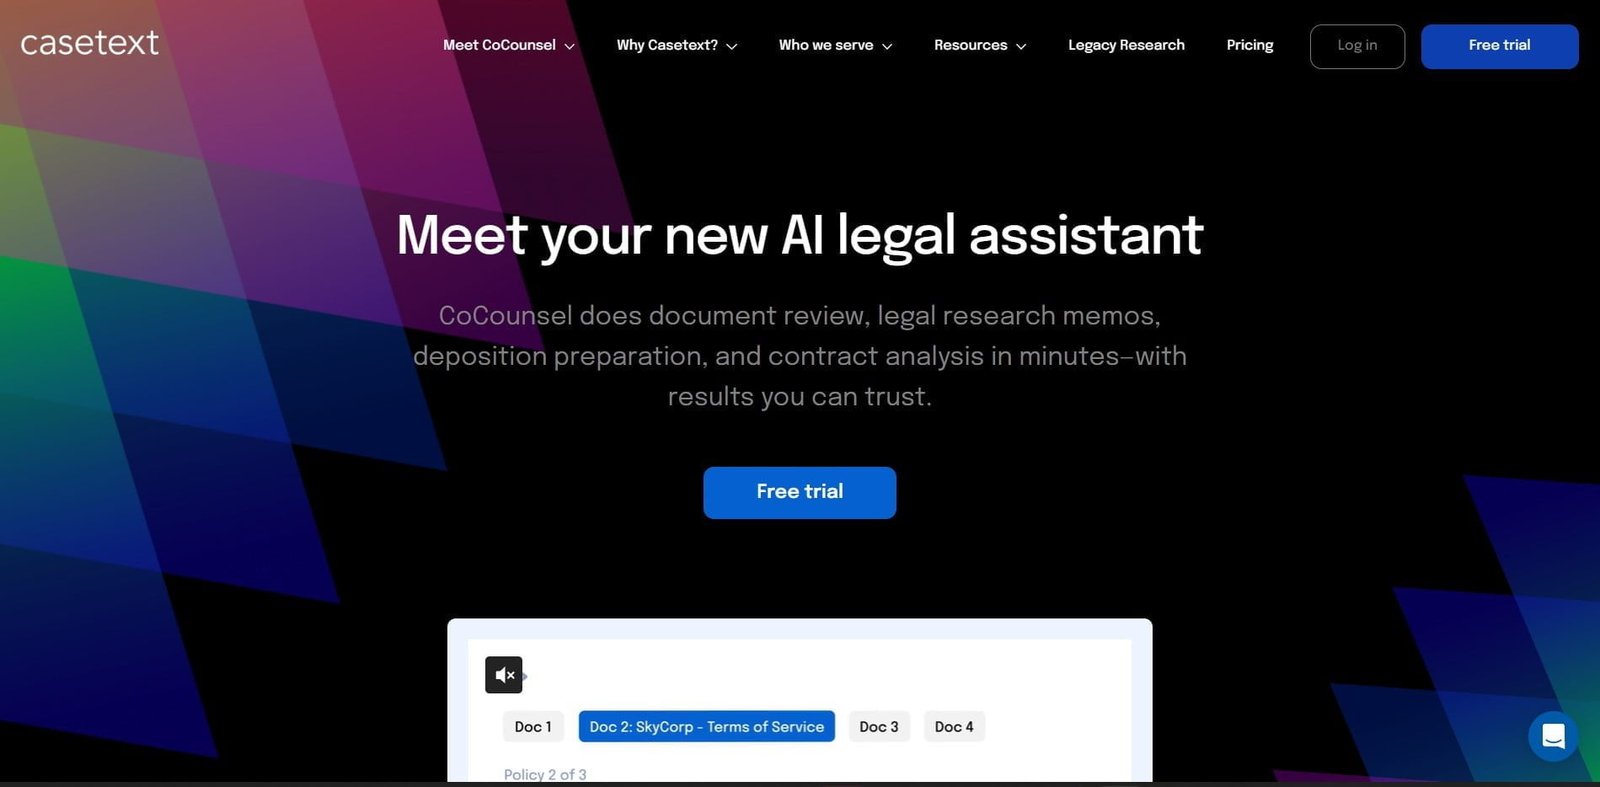 CaseText is an AI law and legal assistant powered by GPT-4. It streamlines legal research